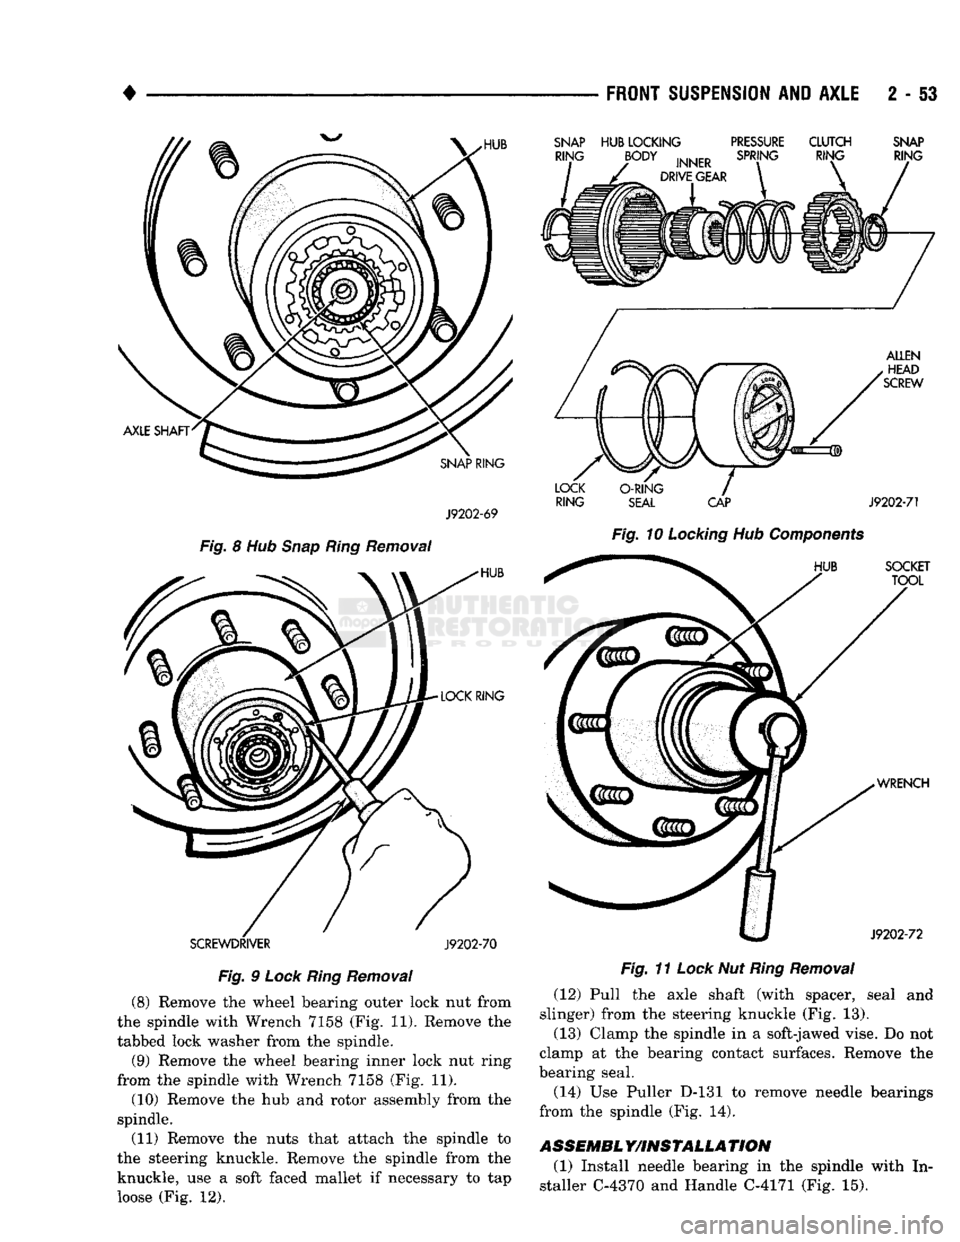 DODGE TRUCK 1993  Service Service Manual 
• ___— . ^
 FRONT
 SUSPENSION
 AND
 AXLE
 2 - 53 

SCREWDRIVER
 J9202-70 
Fig.
 9
 Lock
 Ring
 Removal 
 (8) Remove the wheel bearing outer lock nut from 
the spindle with Wrench 7158 (Fig. 11). 